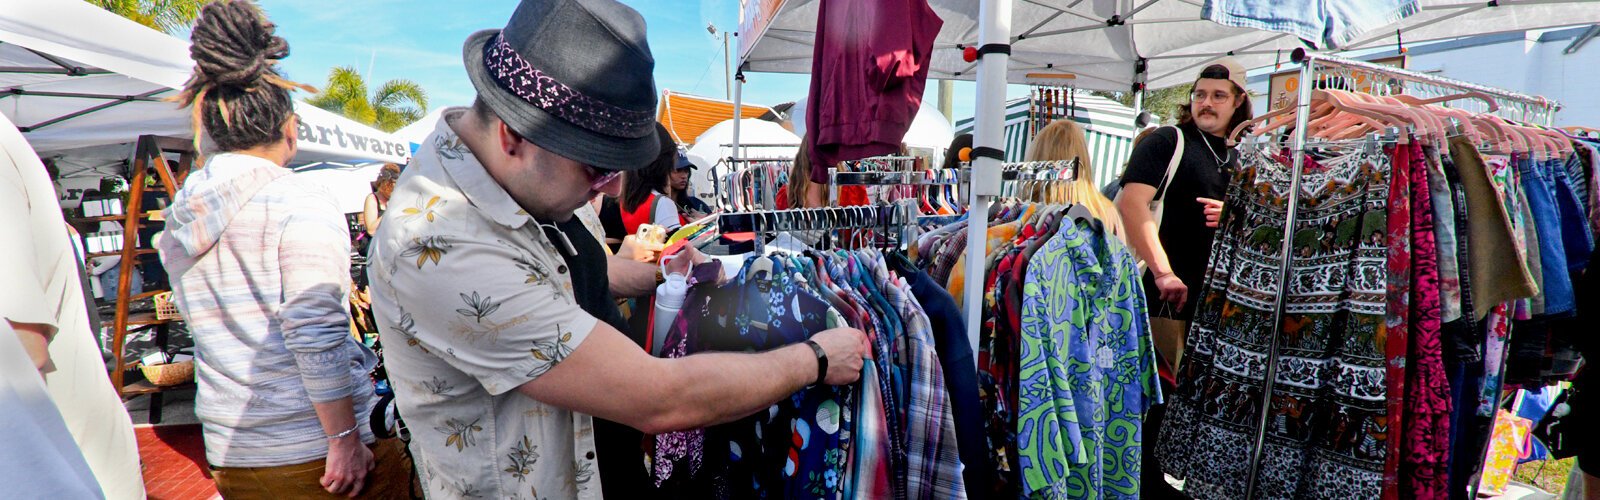 The pleasure of going through racks of secondhand vintage clothing is real at the Indie Flea. 